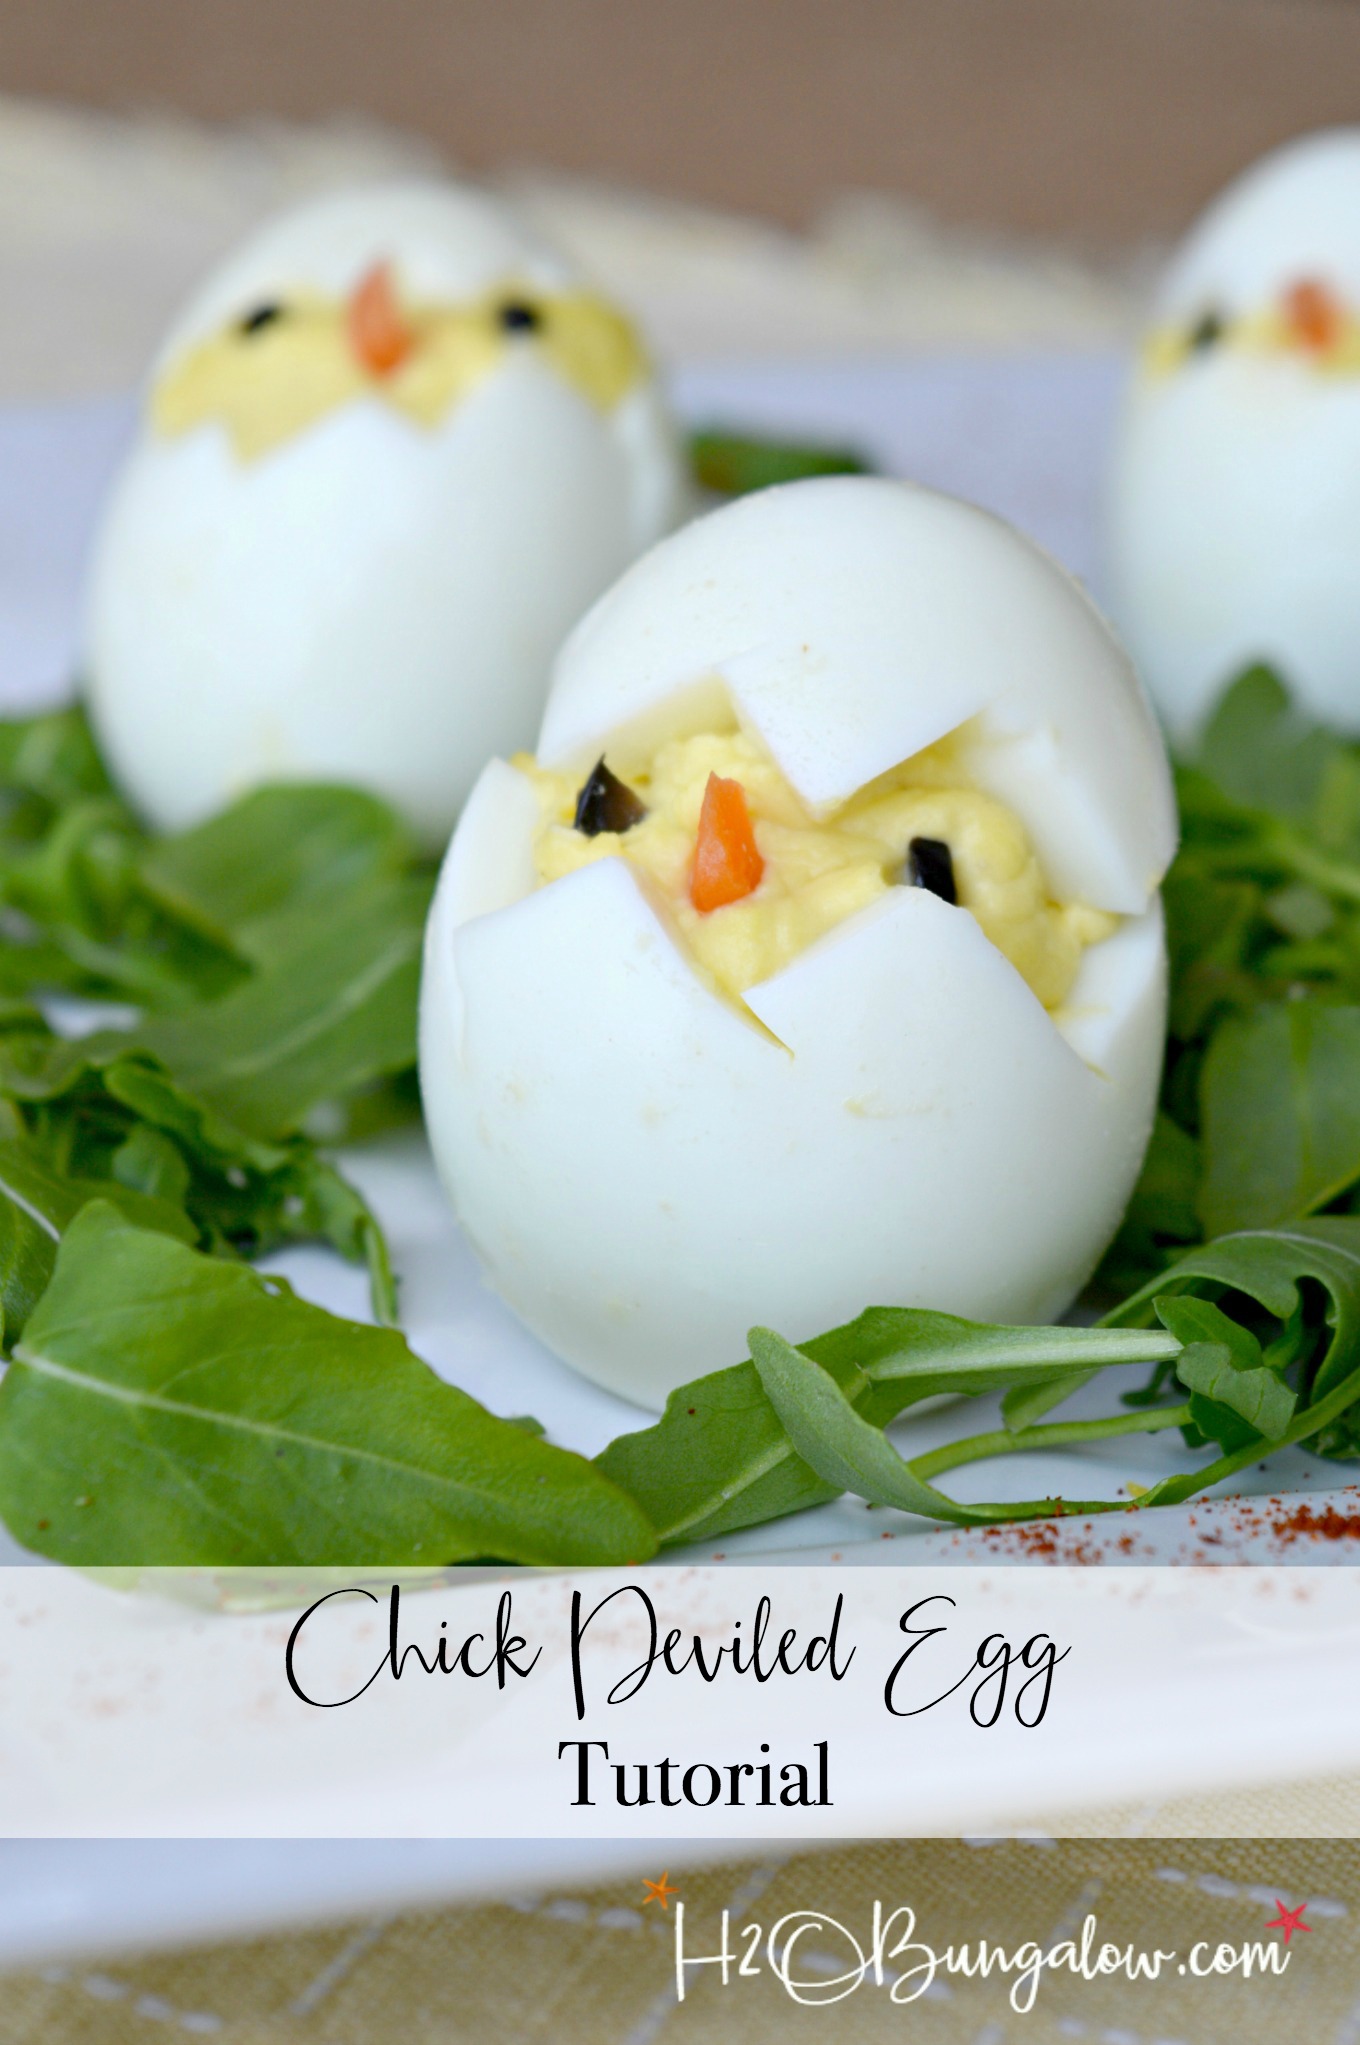 Easy to make deviled egg easter chick recipe and tutorial. They aren't hard to make but knowing a few tricks on how to make these cute chick deviled eggs is a must! Find them here at H2OBungalow